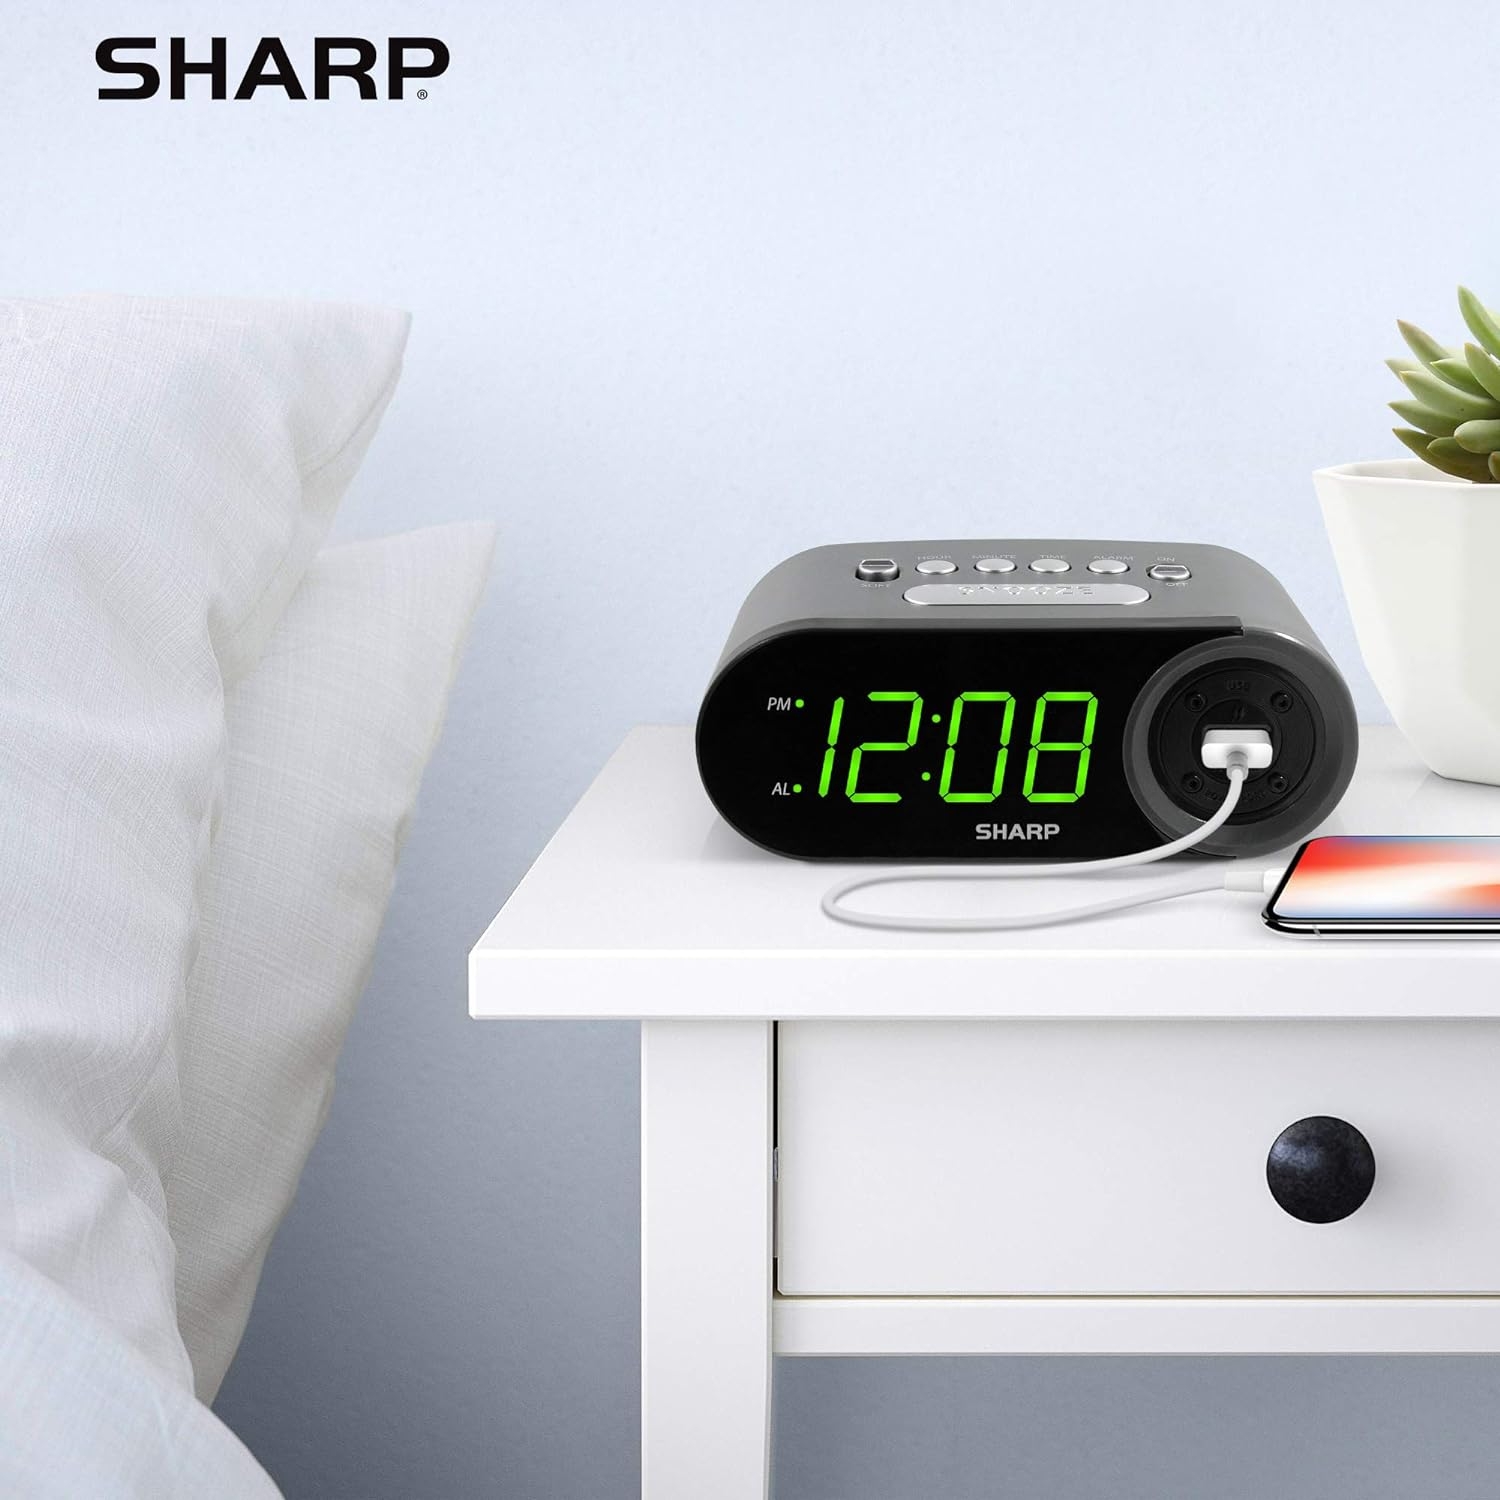 SHARP Digital Easy to Read Alarm Clock with 2 AMP High-Speed USB Charging Power Port - Charge Your Phone, Tablet with a high Speed Charge! Simple, Easy to Use Operation, Black – Green LEDs